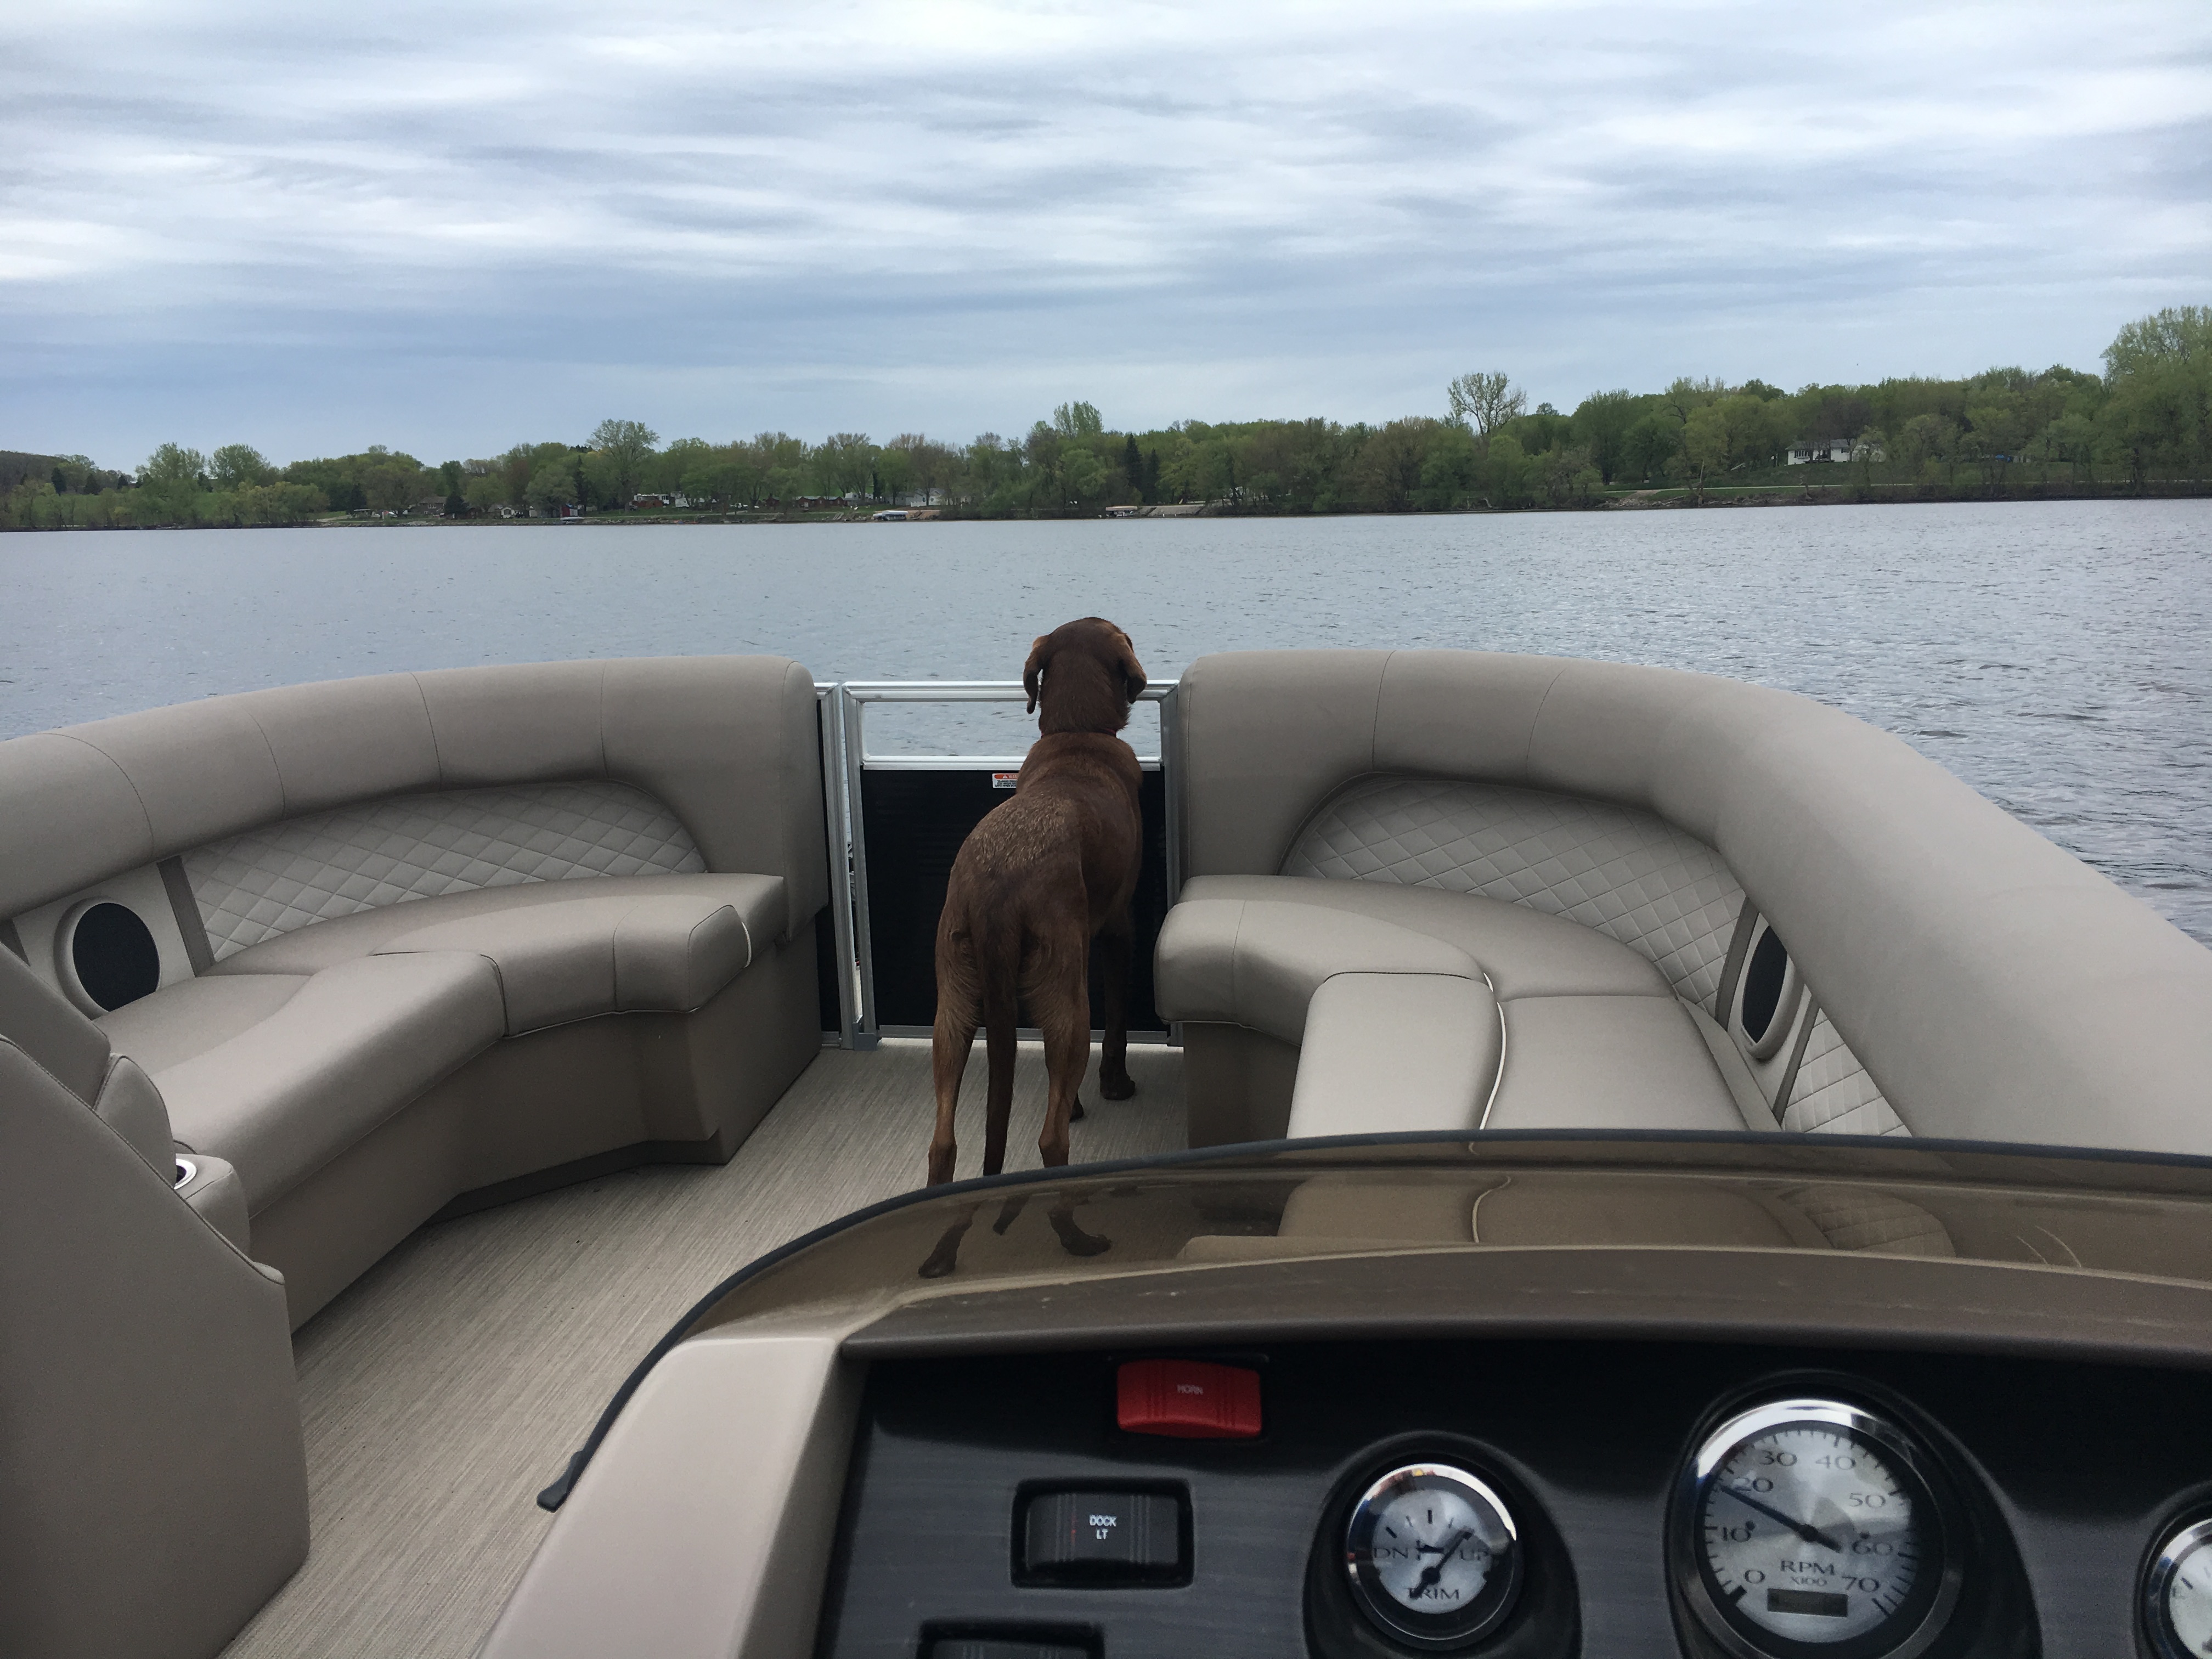 First time on the lake with the new Benny.